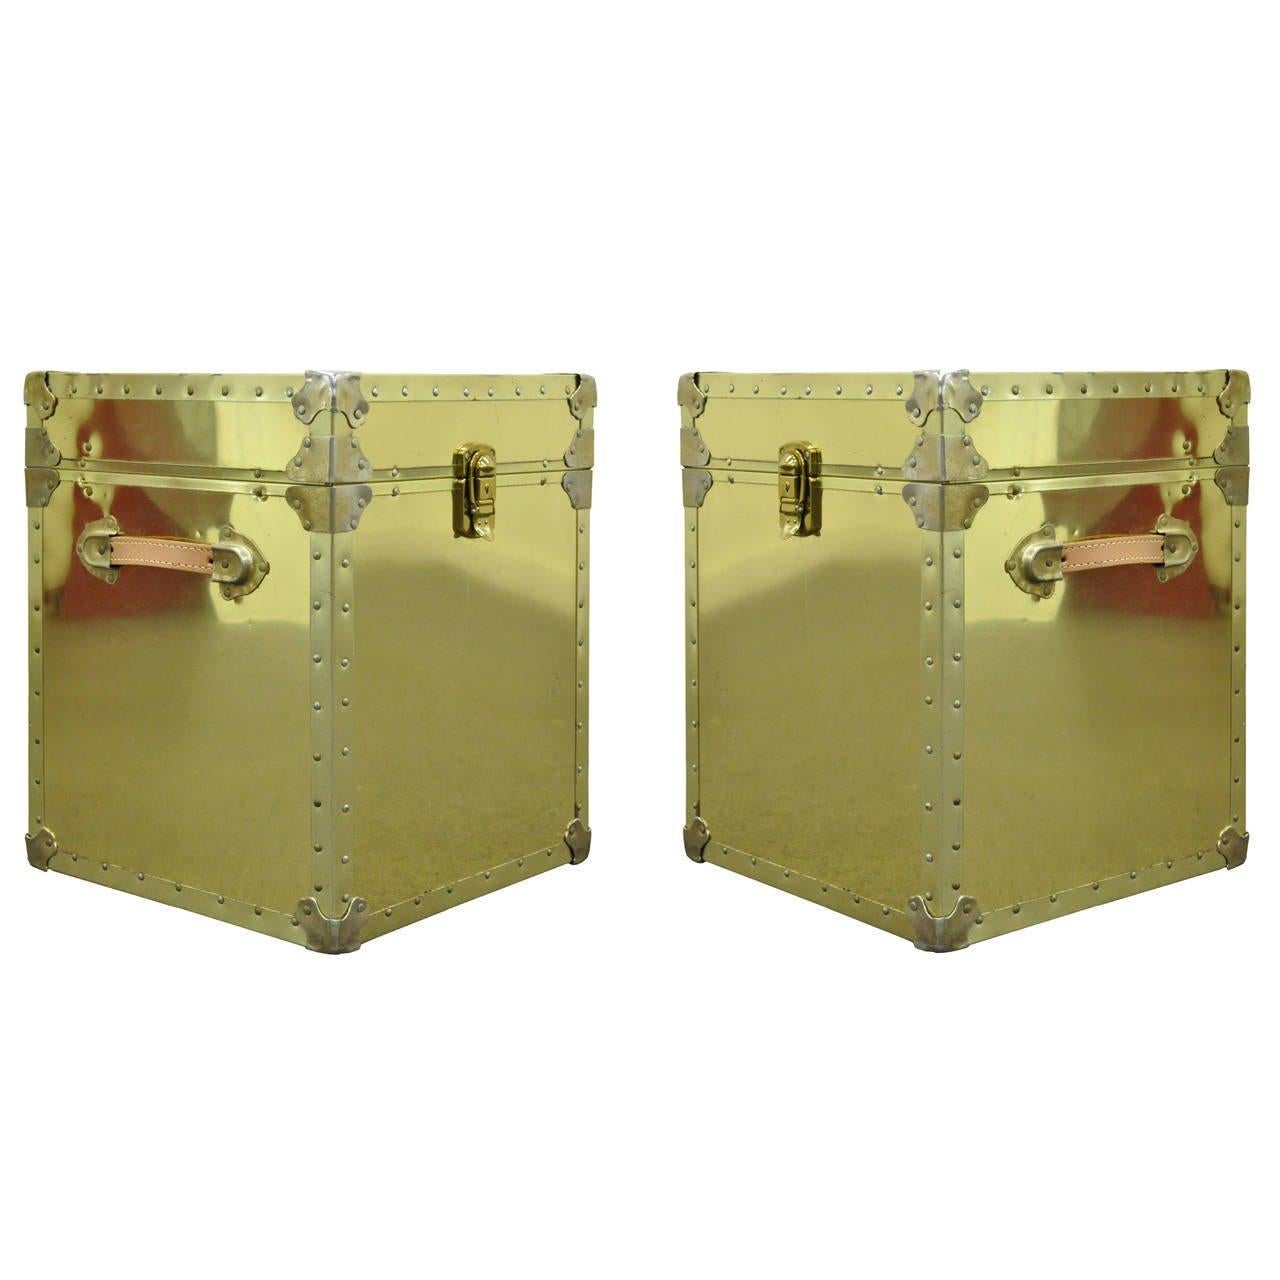 Pair of Hollywood Regency Brass Clad Trunks Chest Side Tables by Luggage Gallery 2